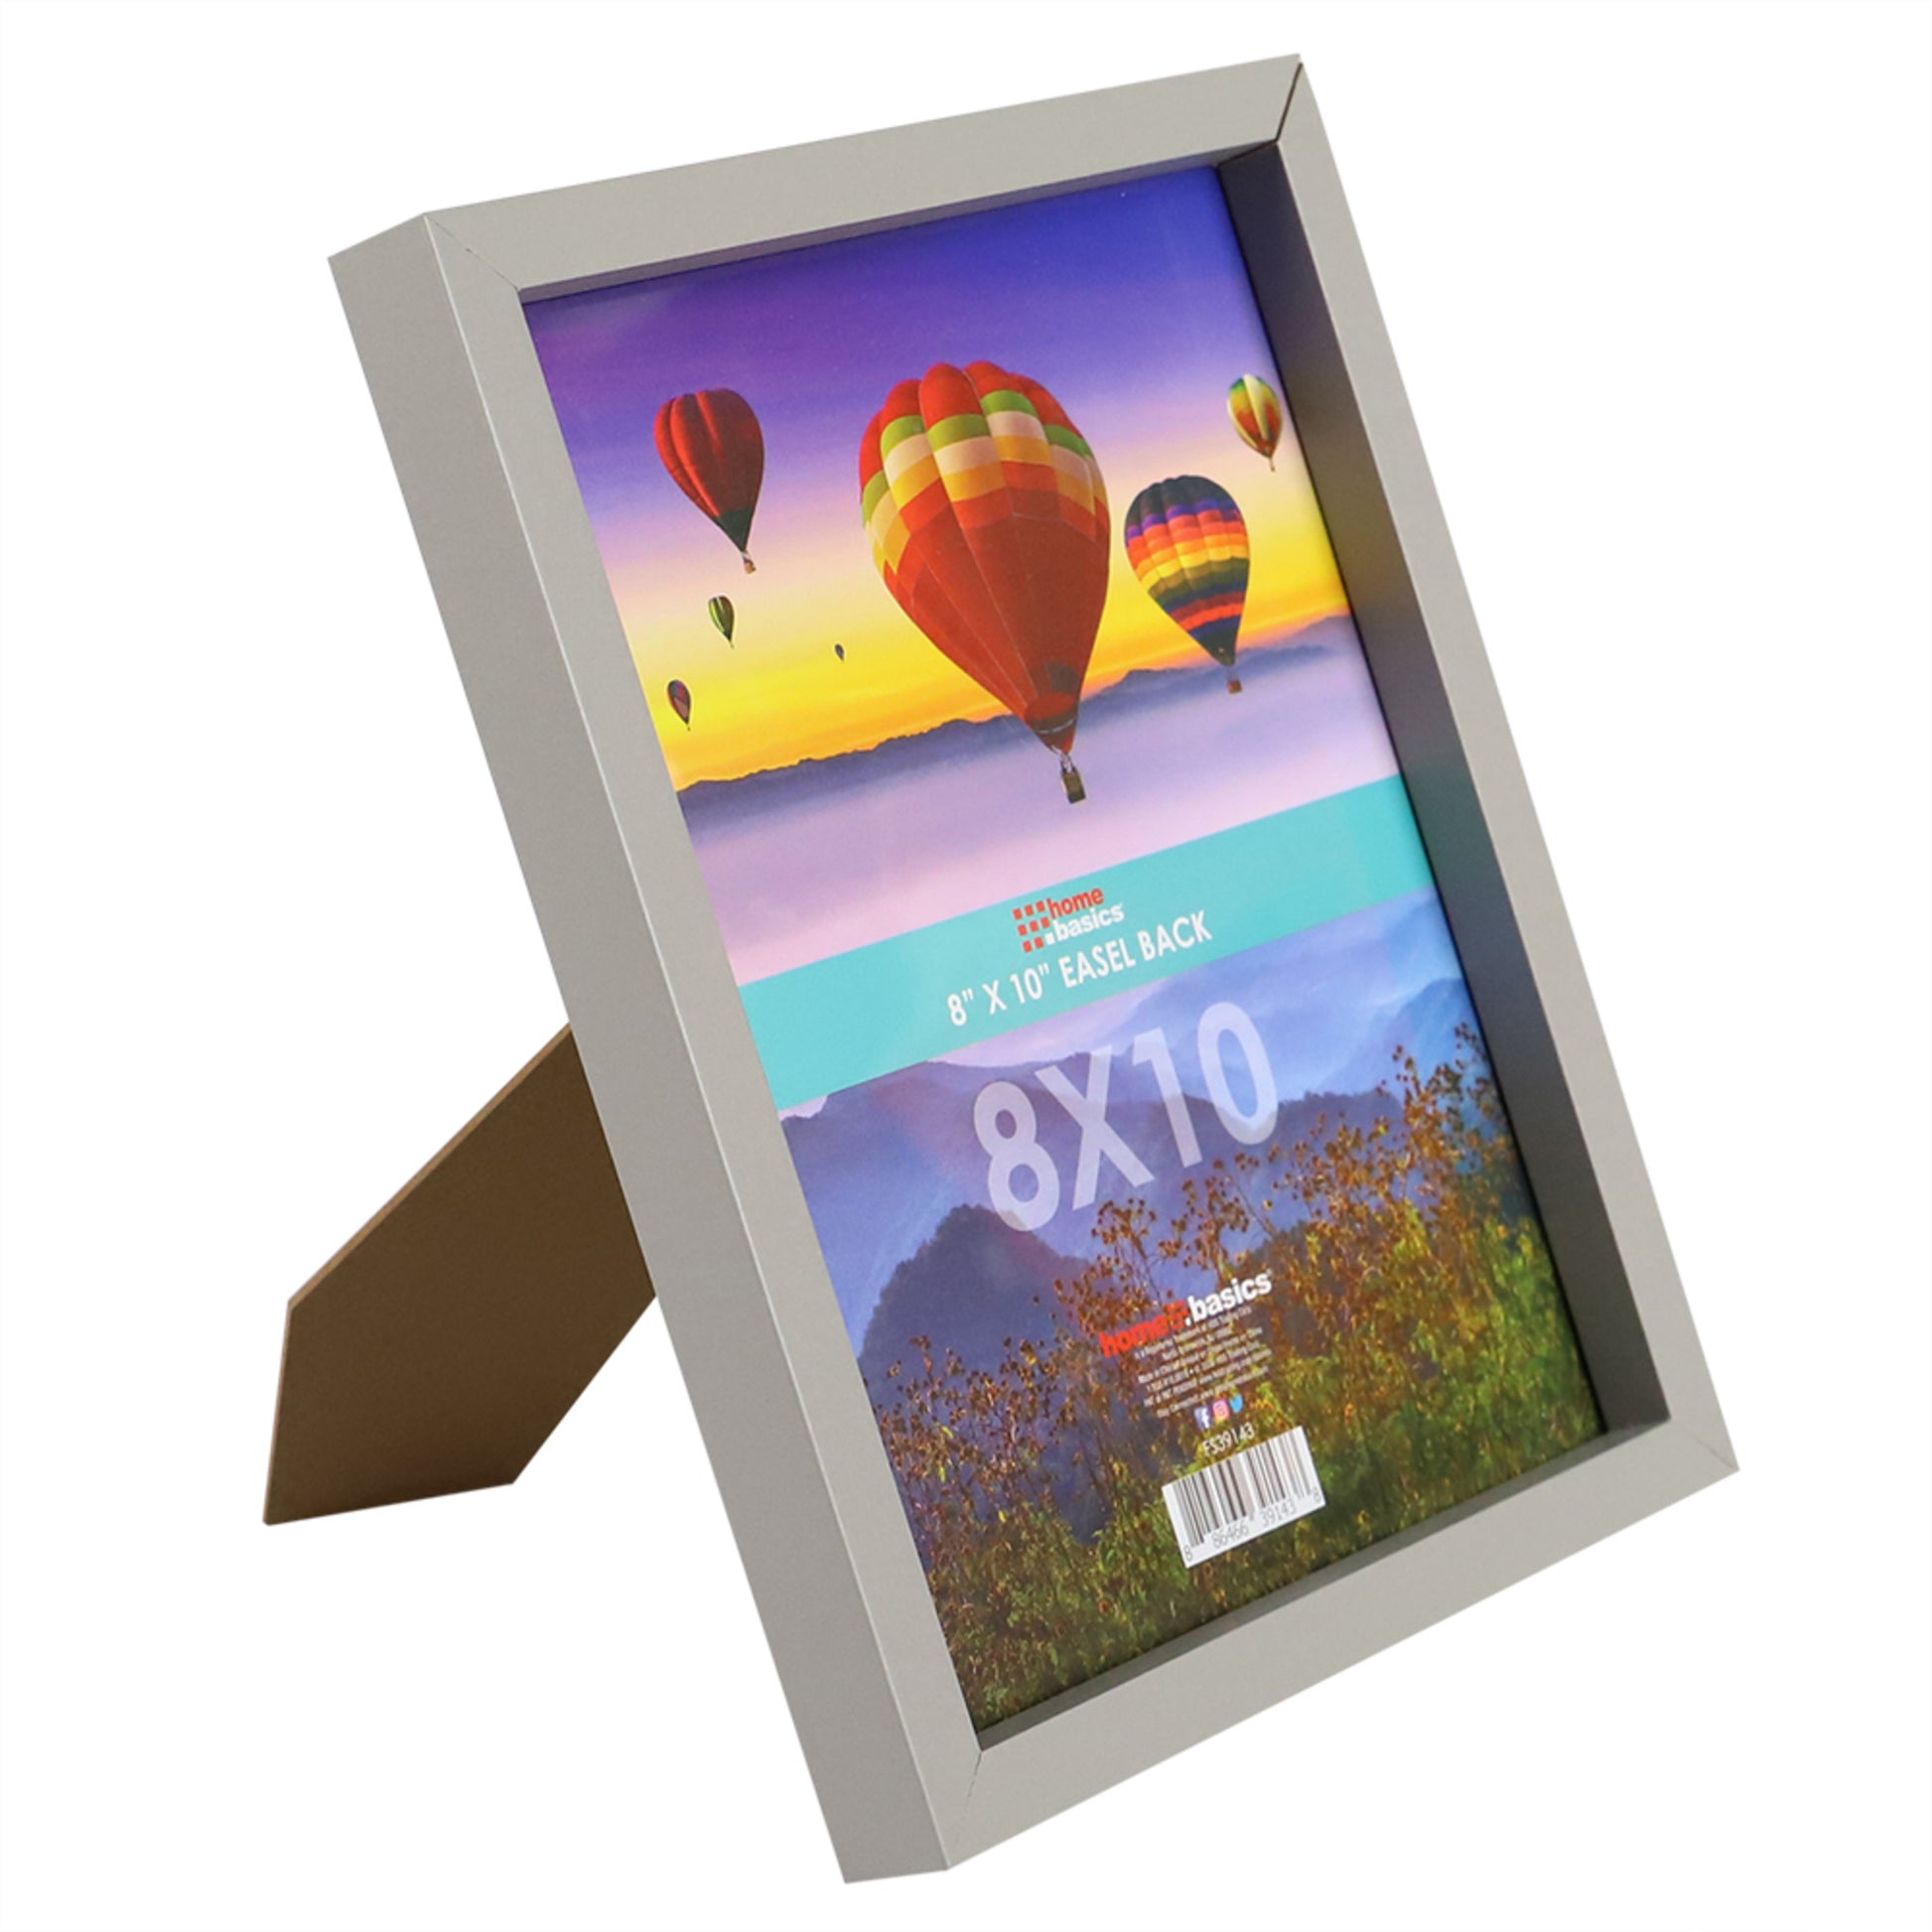 Home Basics 8” x 10” MDF Picture Frame with Easel Back, Grey - Grey